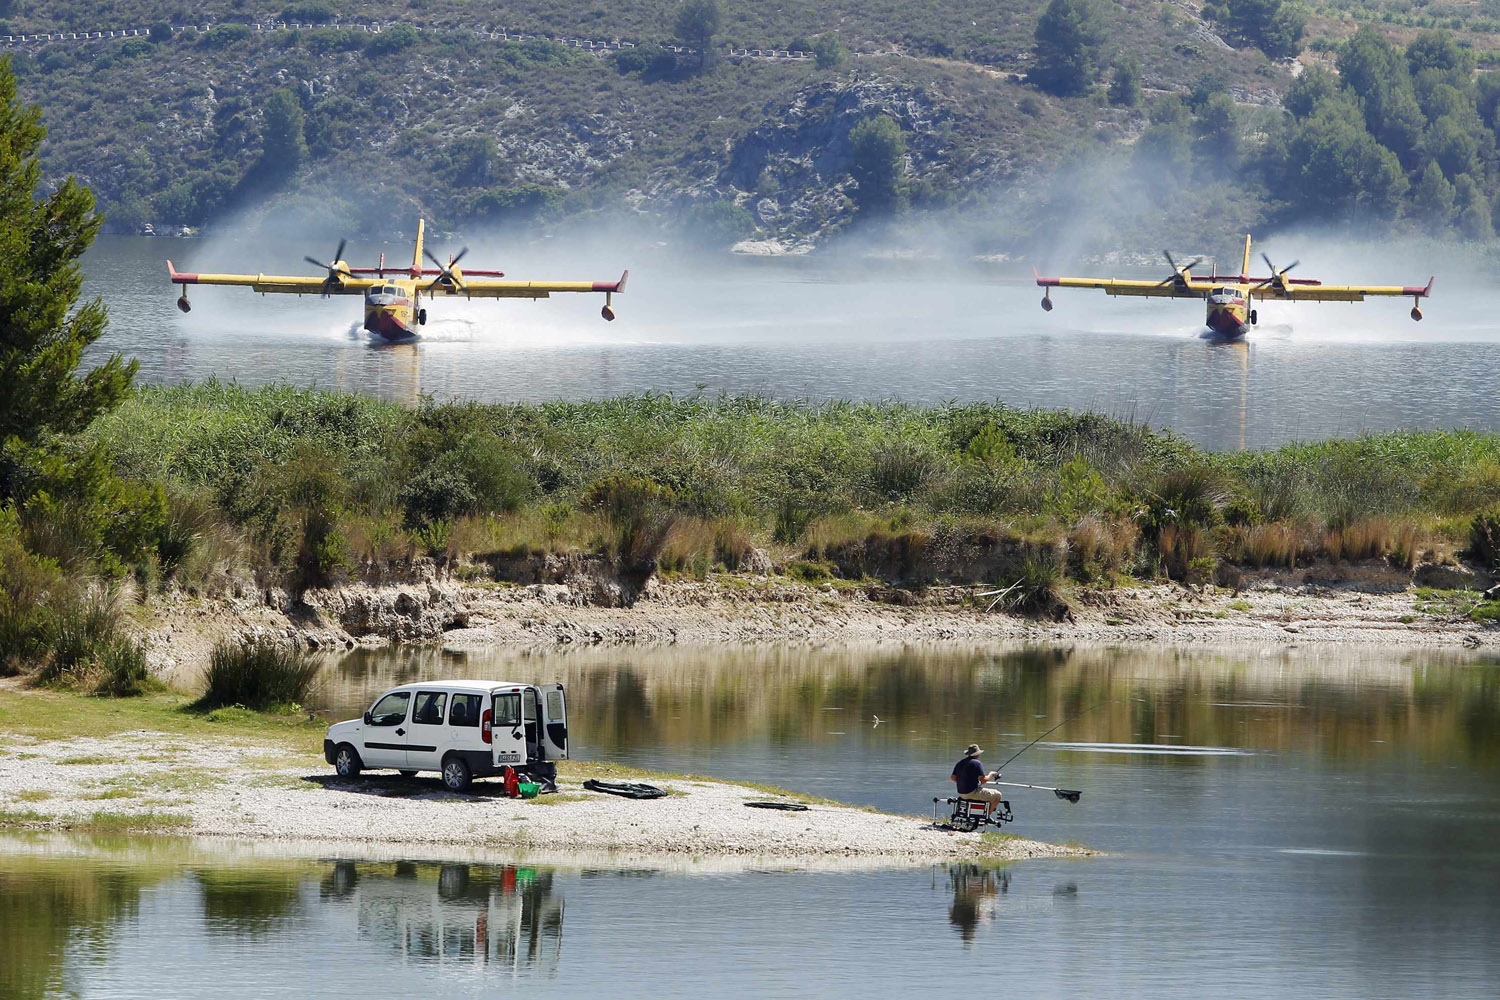 July 13, 2012. Firefighting planes fetch water from the Beniares reservoir to fight a wildfire next to the Sierra Mariola Nature Park in Cocentaina, Spain.